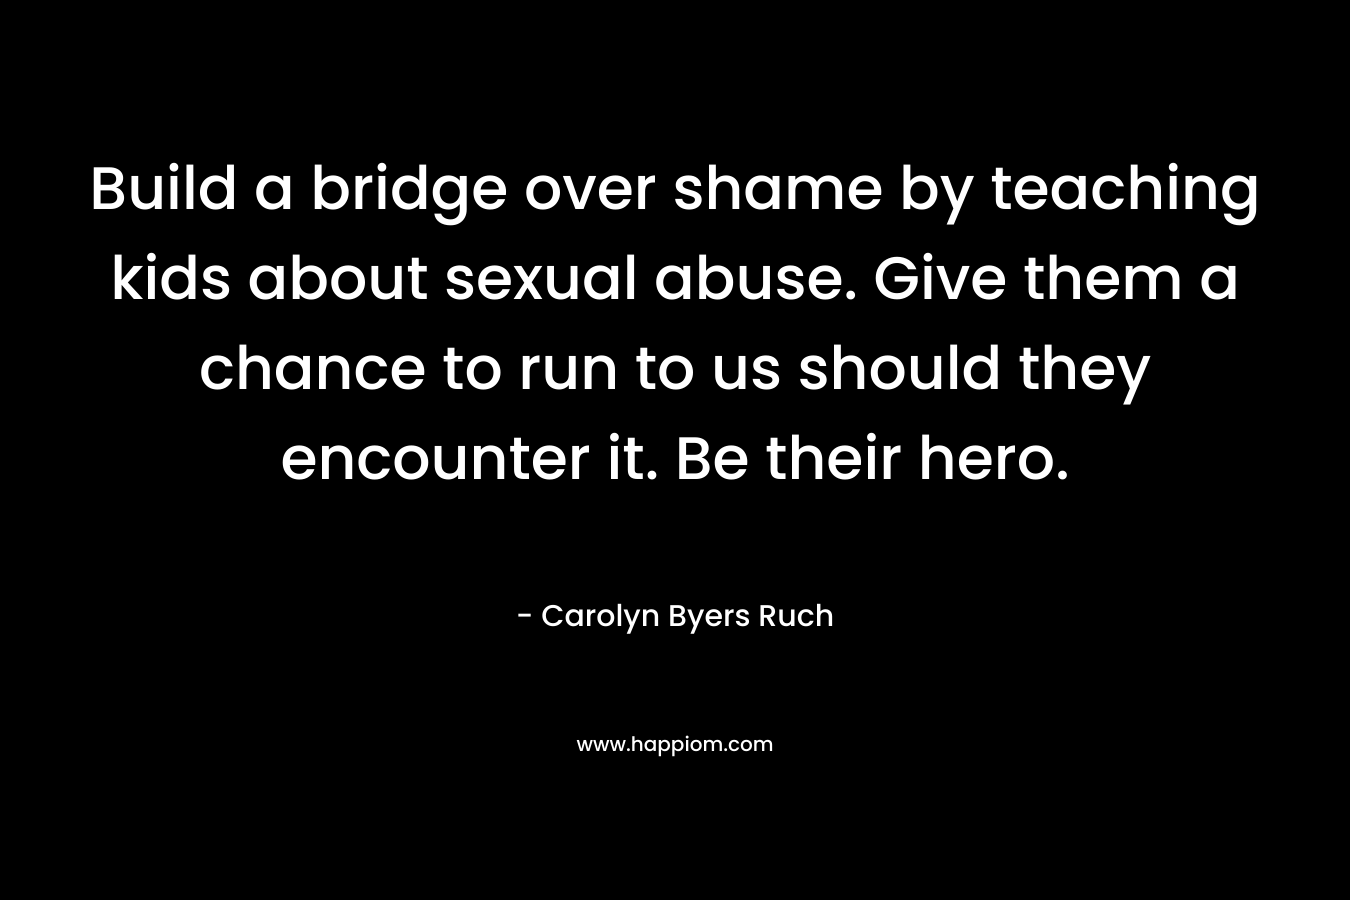 Build a bridge over shame by teaching kids about sexual abuse. Give them a chance to run to us should they encounter it. Be their hero.